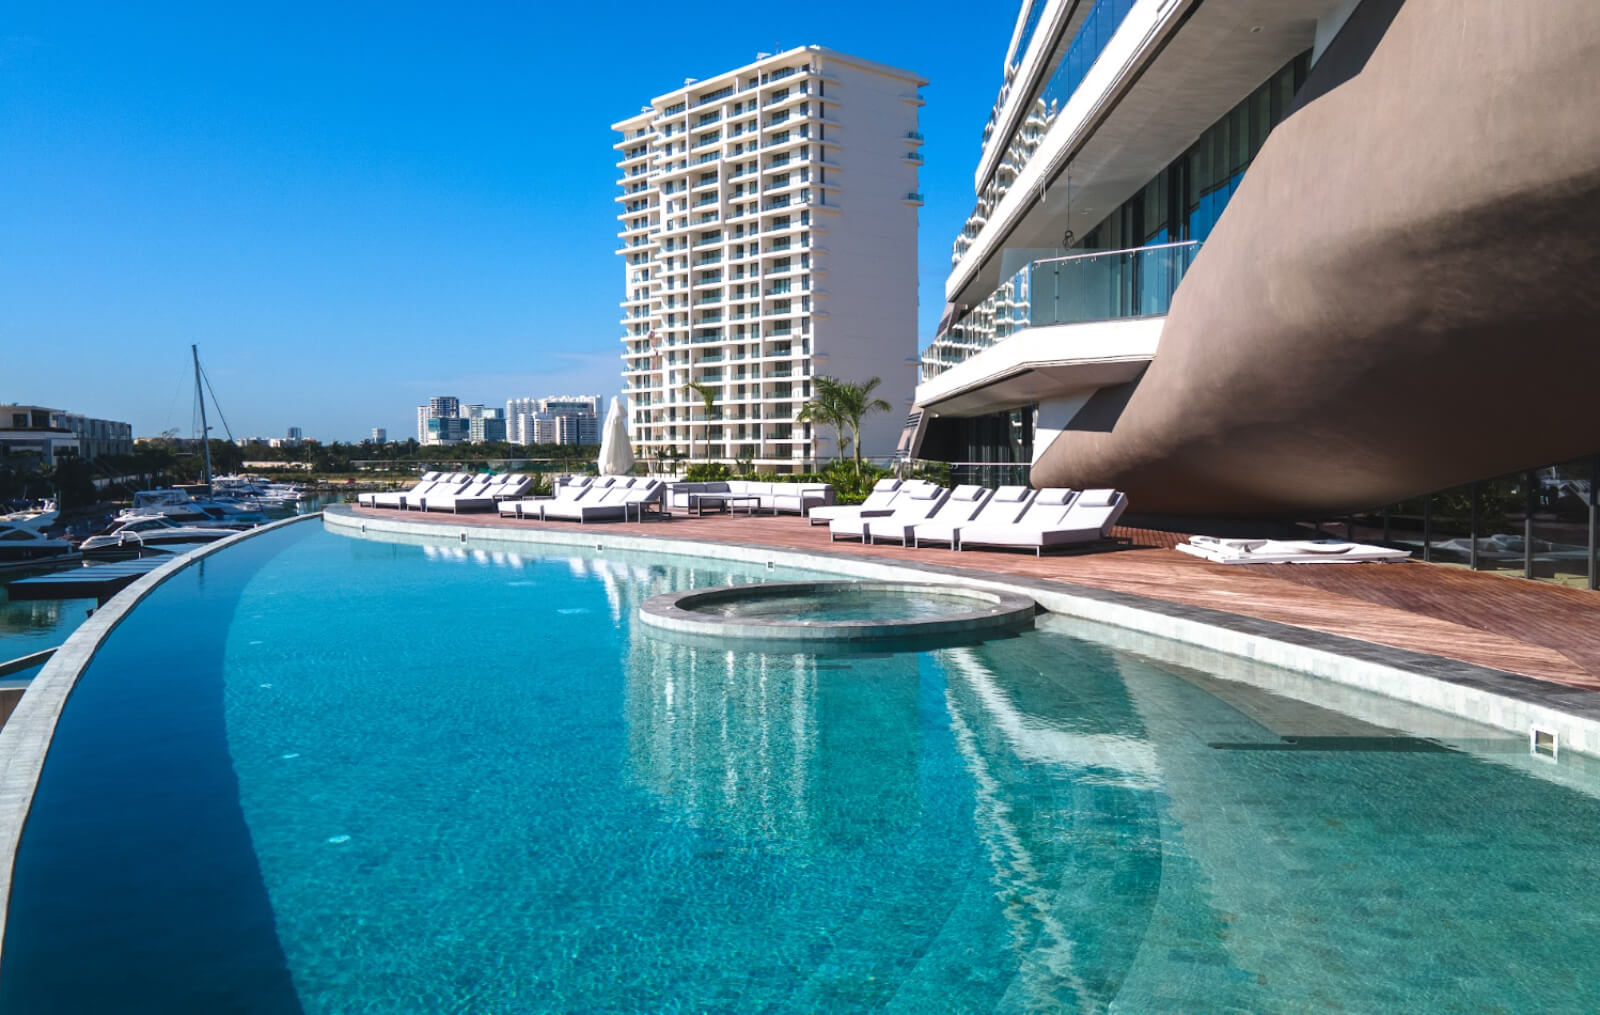 Beachfront penthouse with private pool, luxury amenities in Emerald Cancun Hotel Zone for sale.